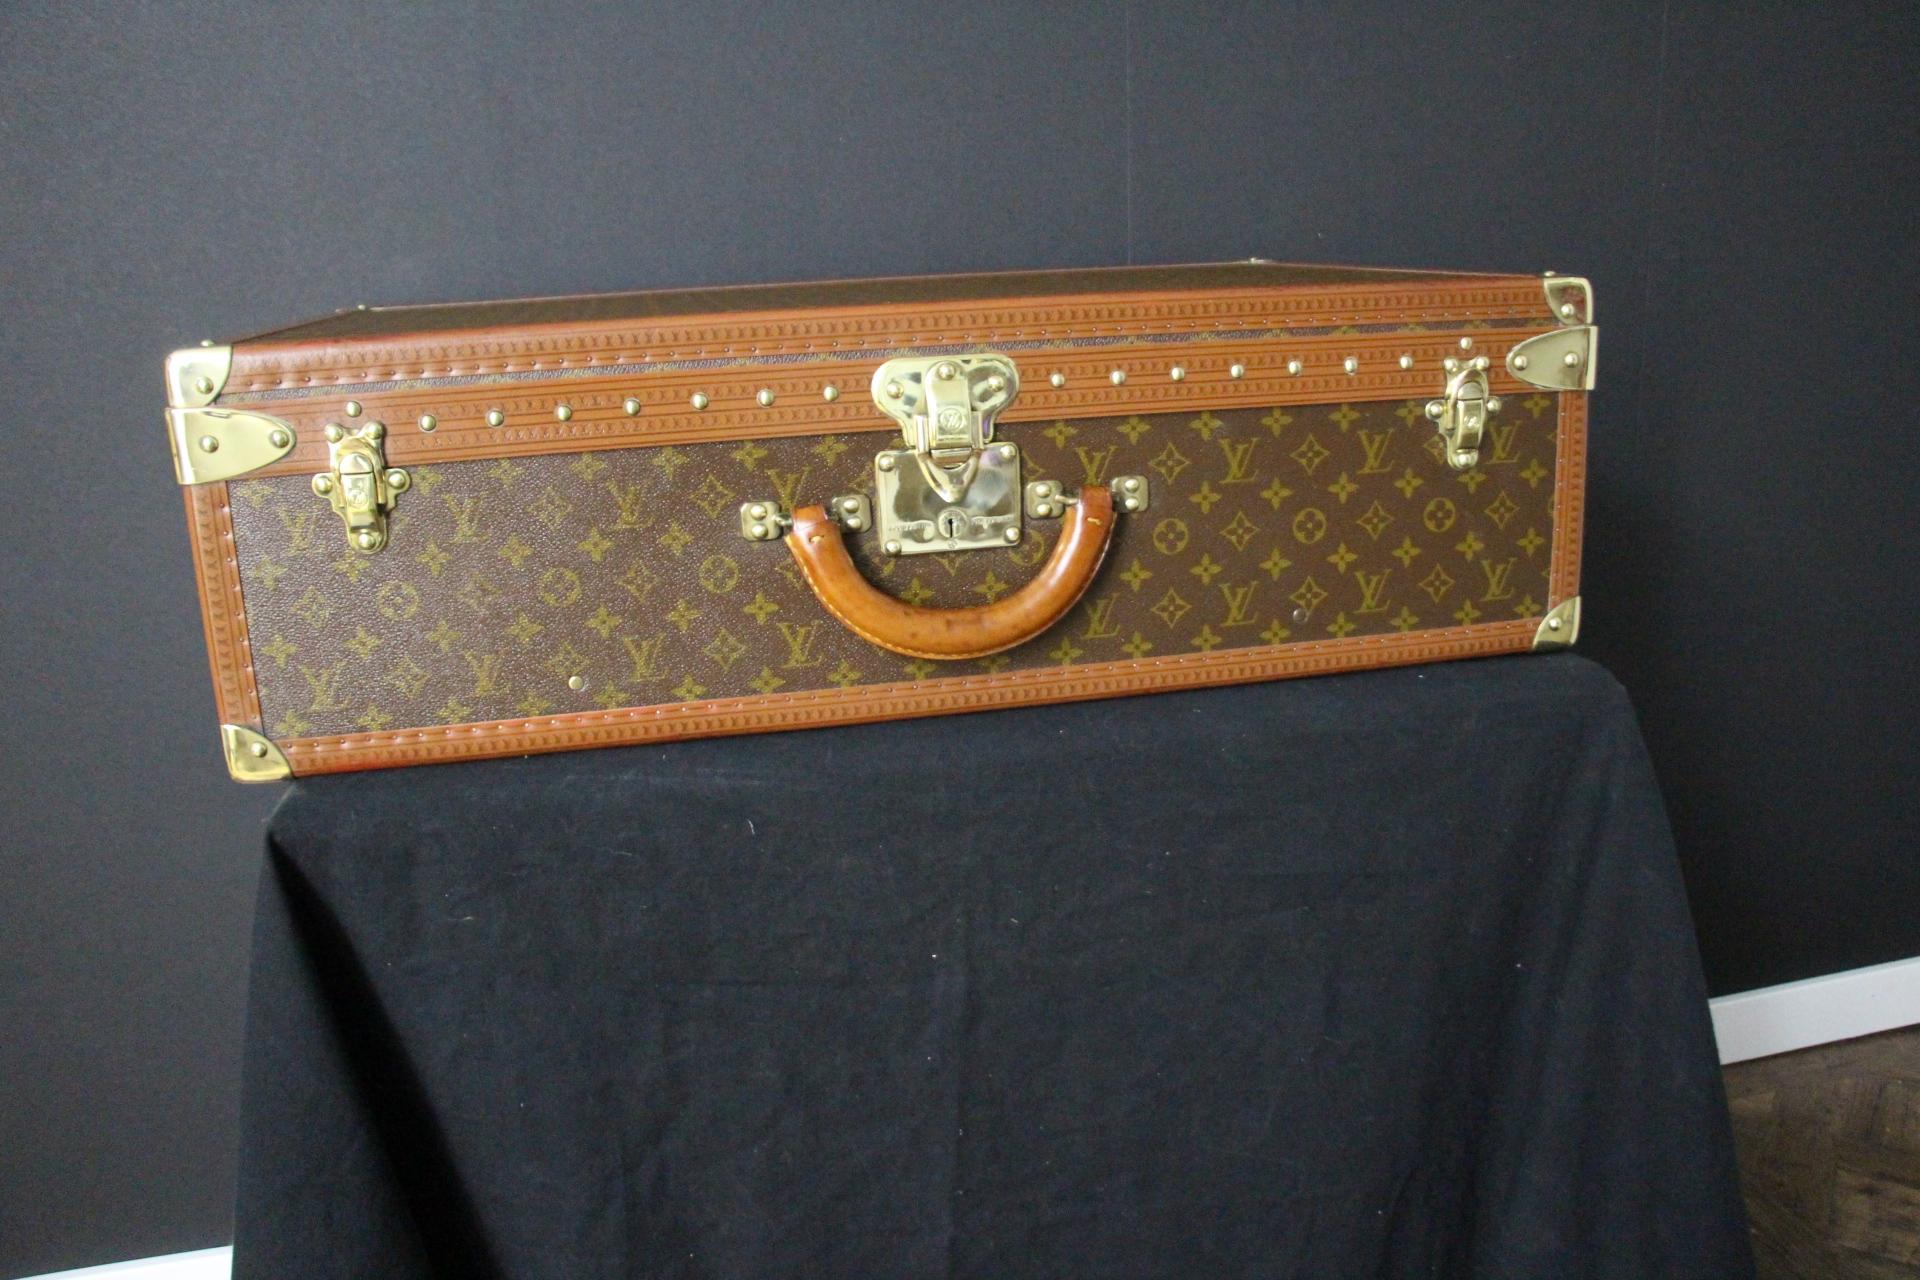 This piece of luggage is a magnificent Louis Vuitton Alzer monogramm suitcase. This 75 cm suitcase is almost the largest and surely the most luxury one made by Louis Vuitton. It features all Louis Vuitton stamped solid brass fittings: locks, clasps